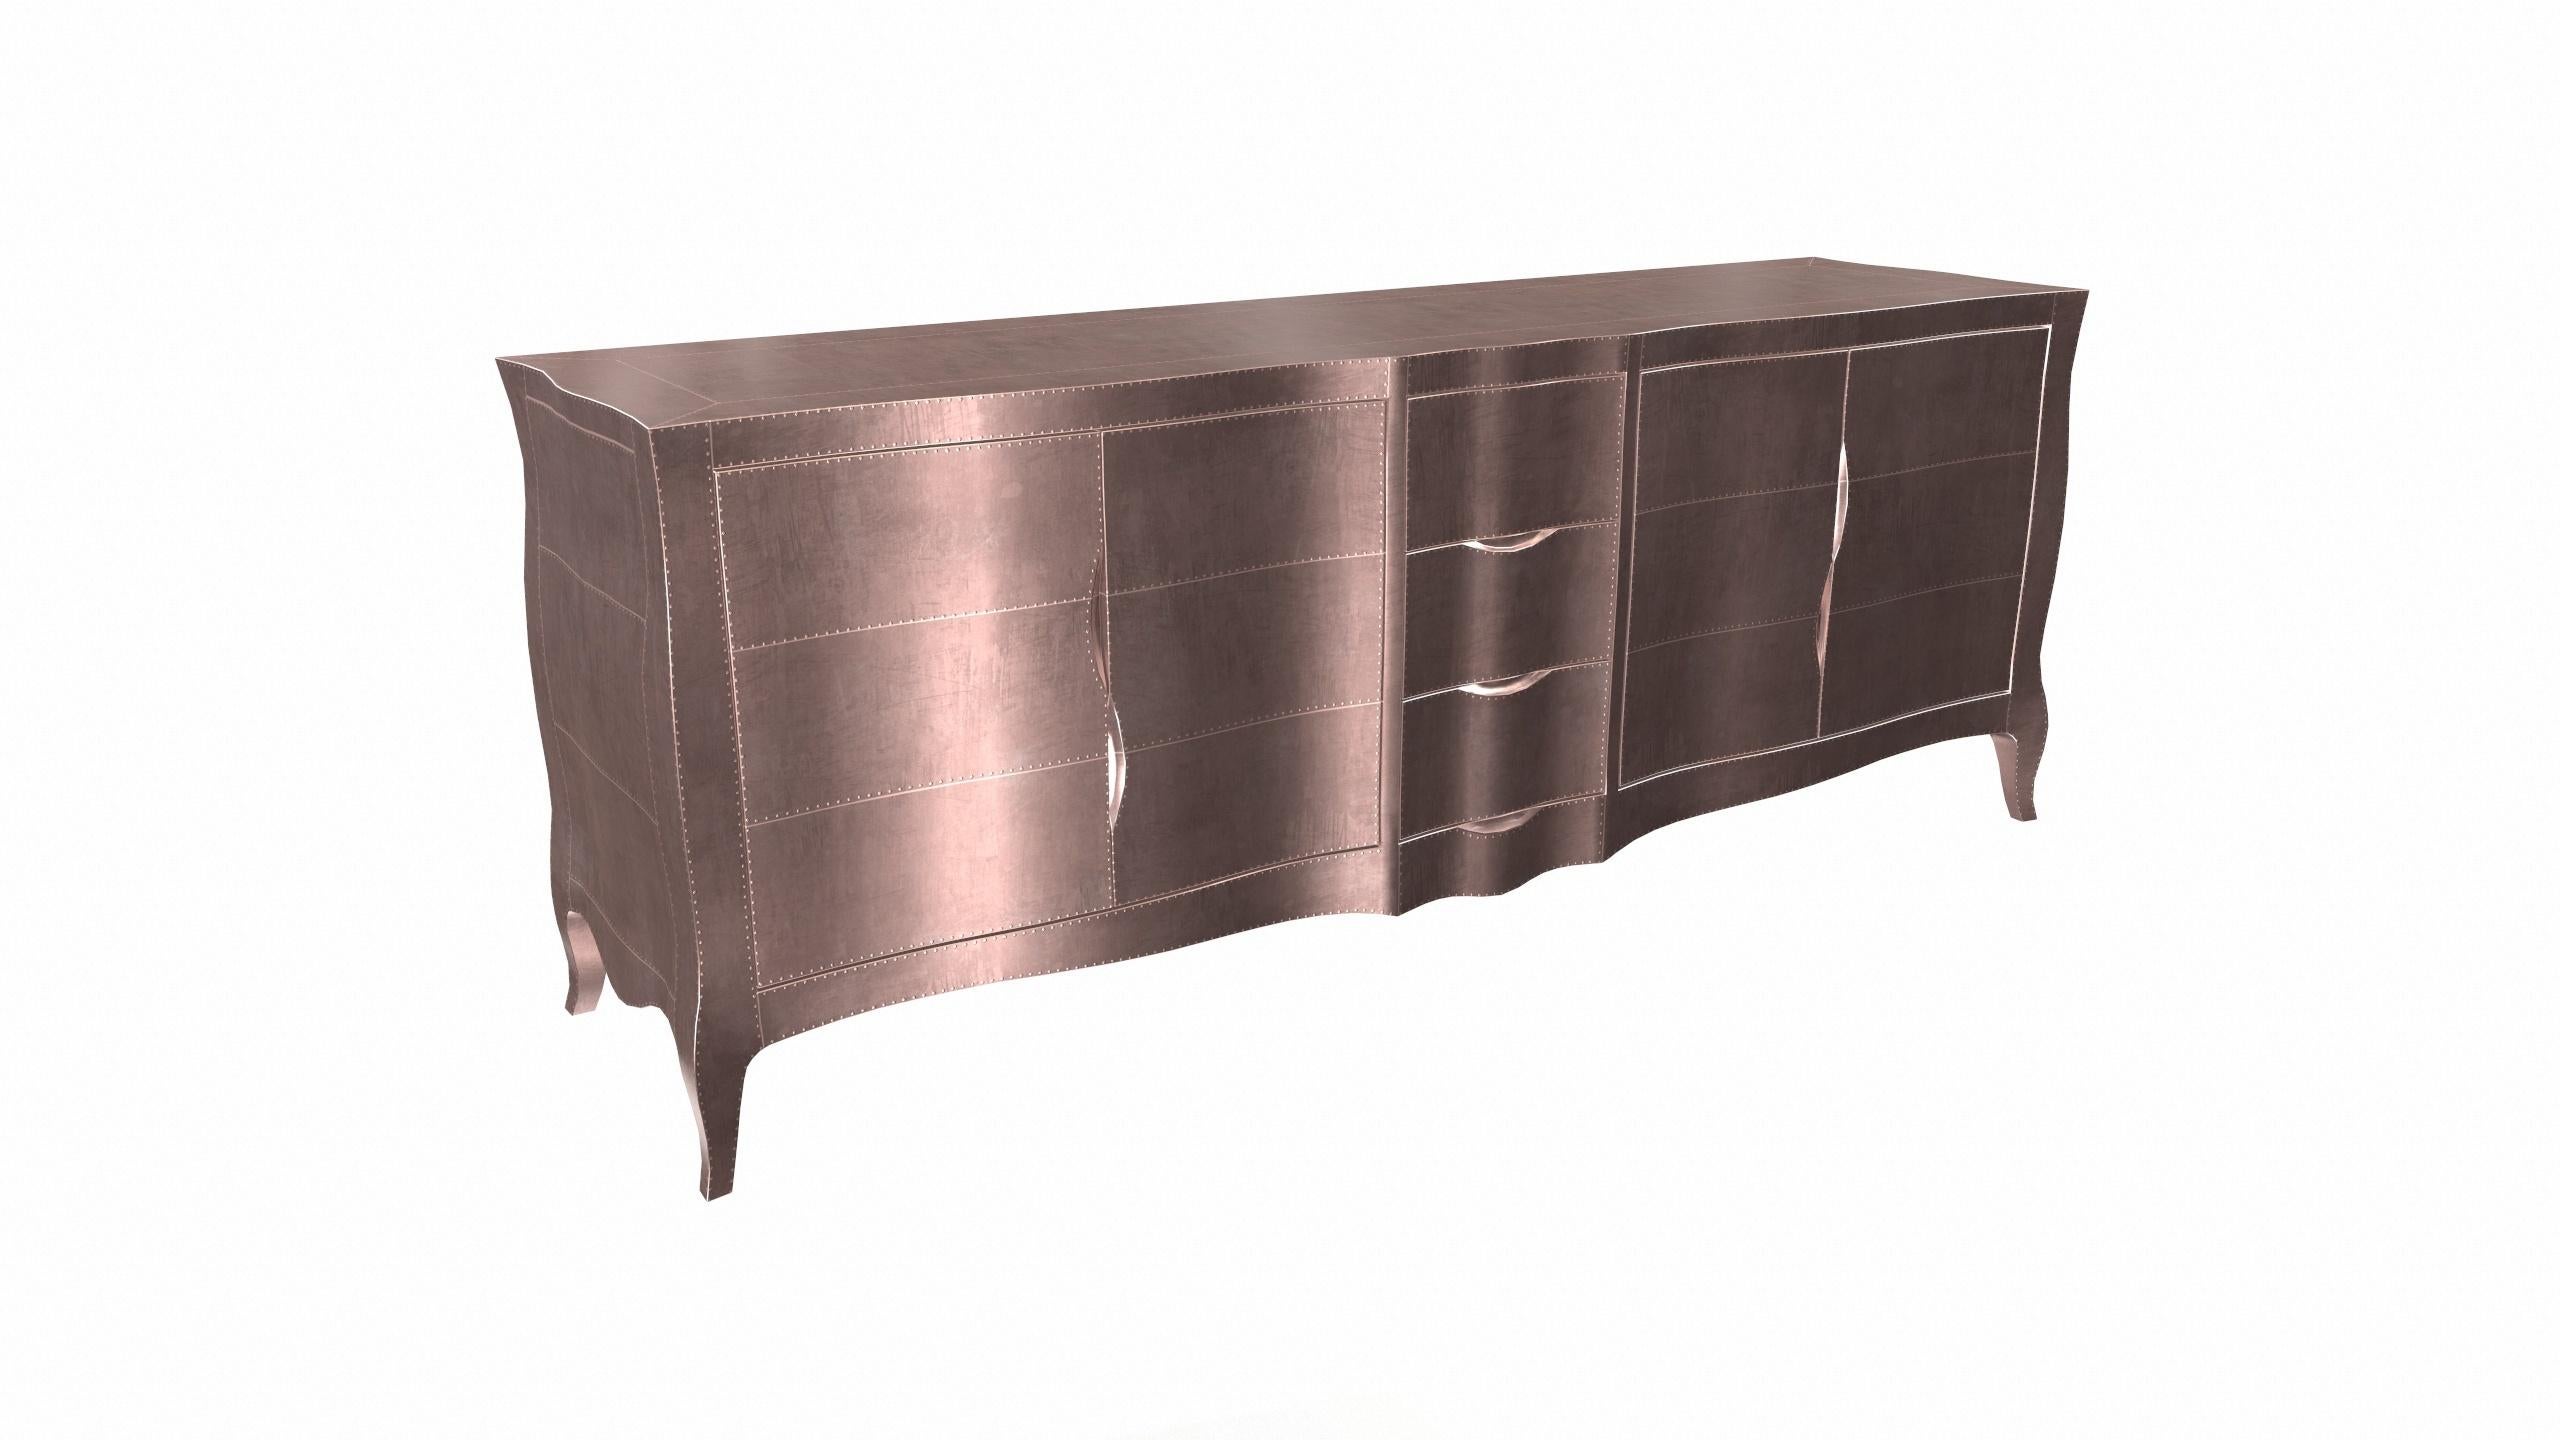 Contemporary Louise Credenza Art Deco Credenza in Smooth Copper by Paul Mathieu for S Odegard For Sale